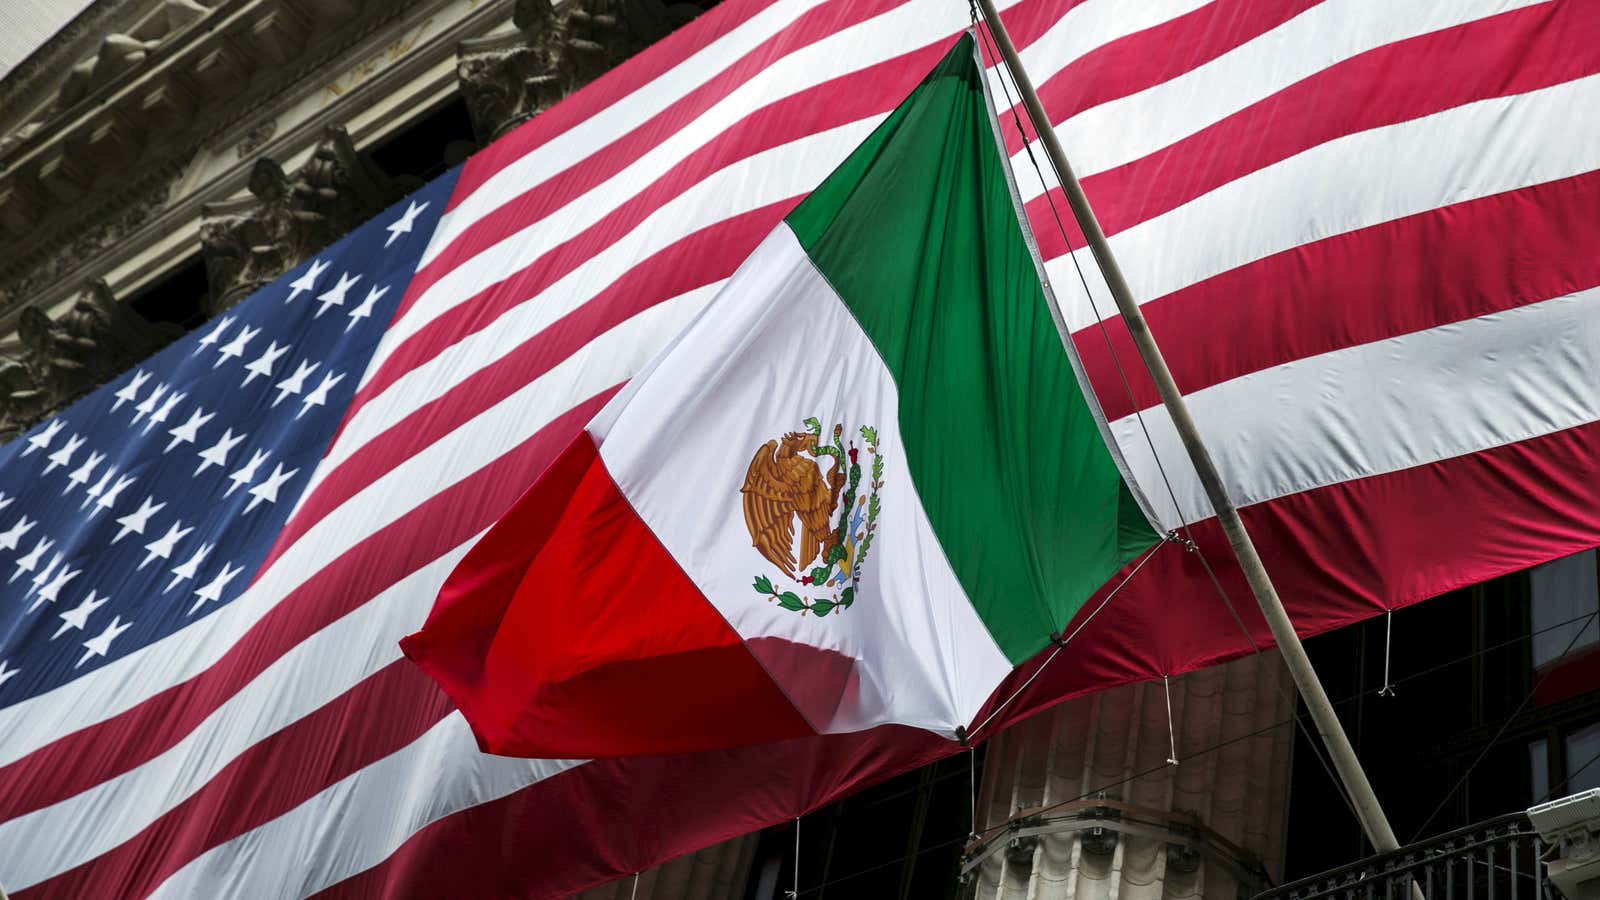 More than 15% of US trade is with Mexico.